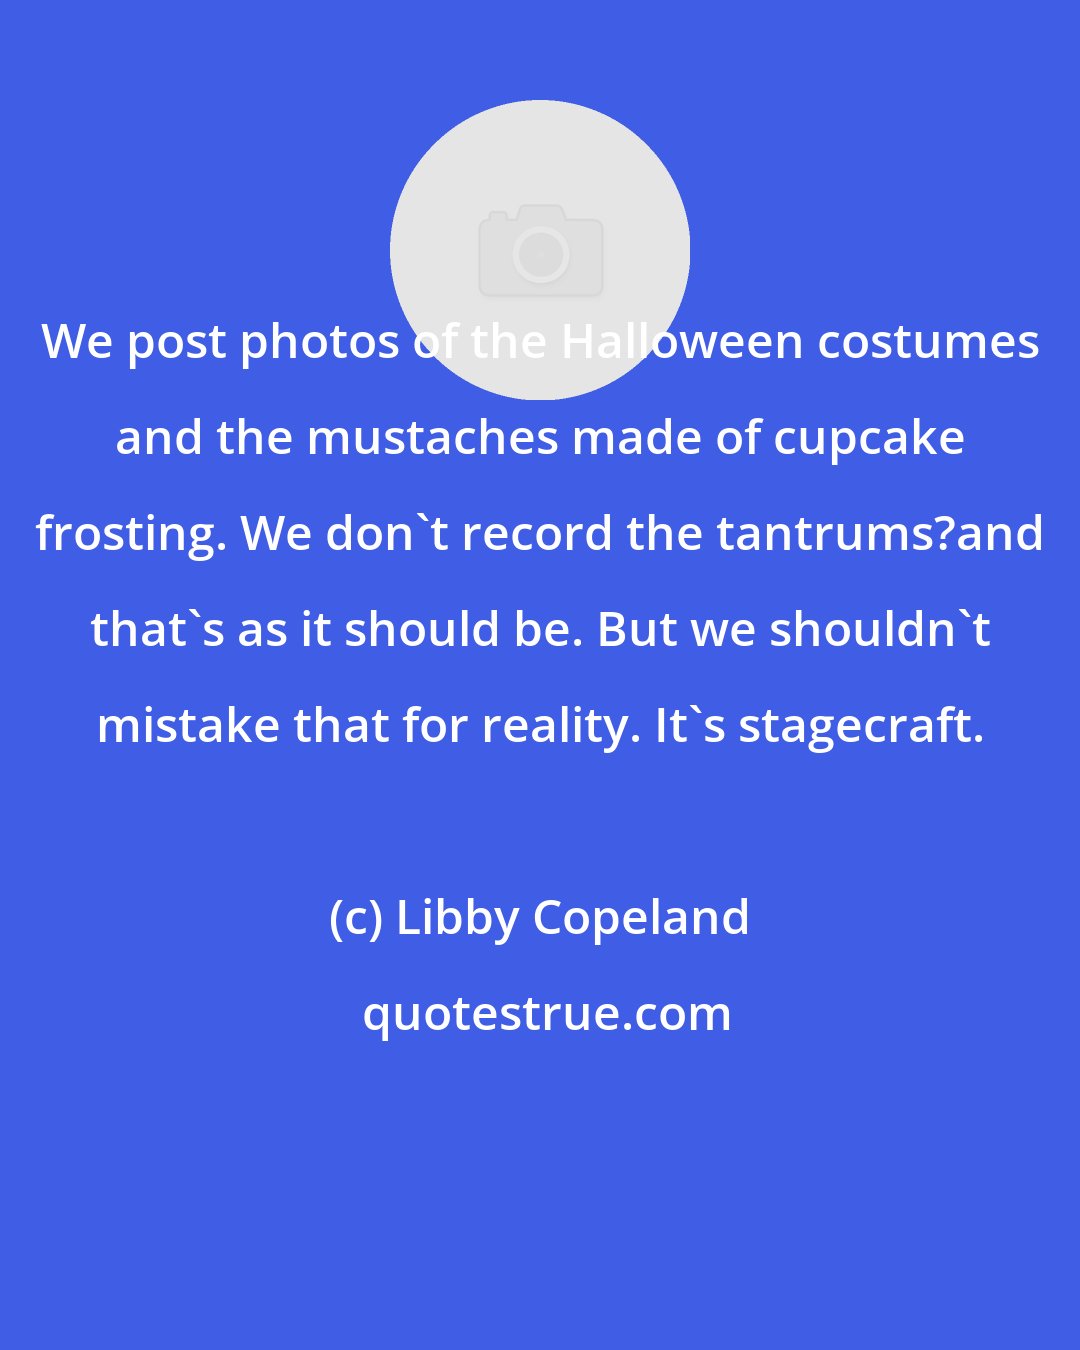 Libby Copeland: We post photos of the Halloween costumes and the mustaches made of cupcake frosting. We don't record the tantrums?and that's as it should be. But we shouldn't mistake that for reality. It's stagecraft.